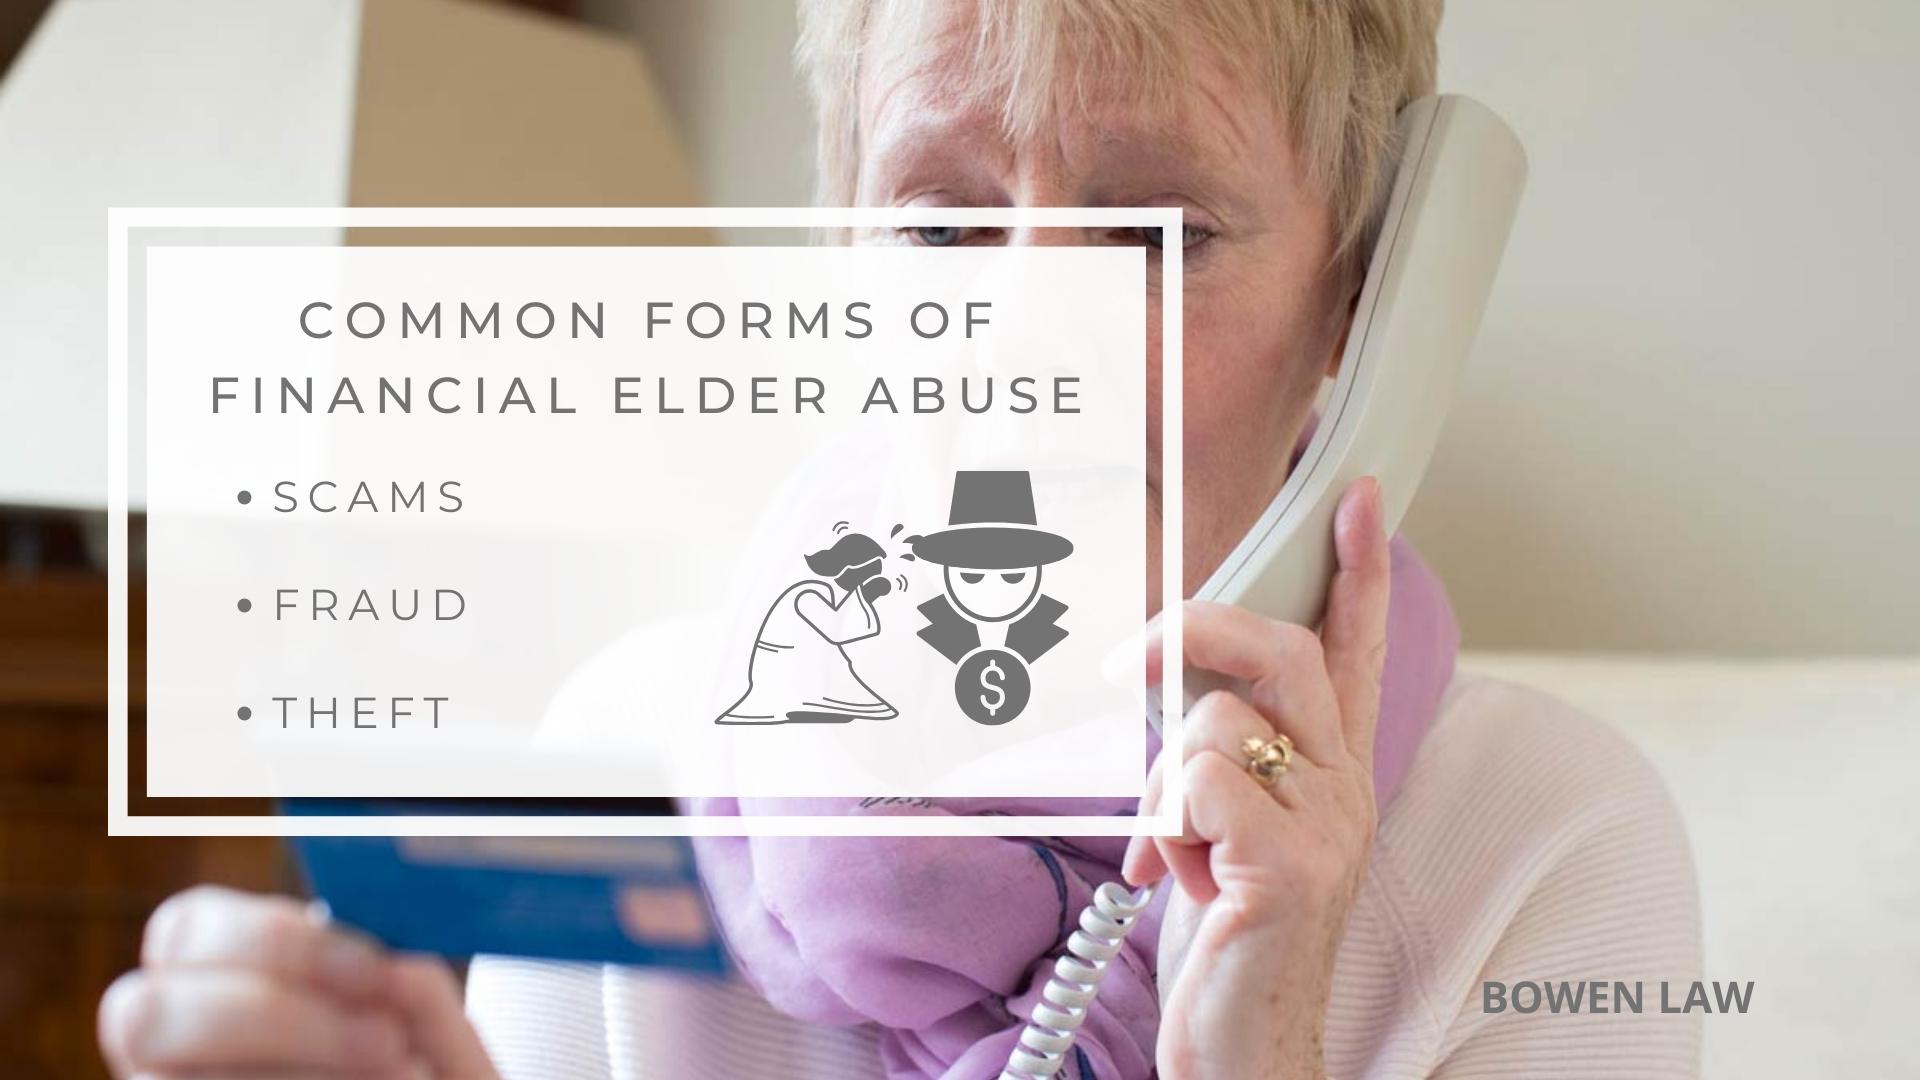 Infographic image of common forms of financial elder abuse